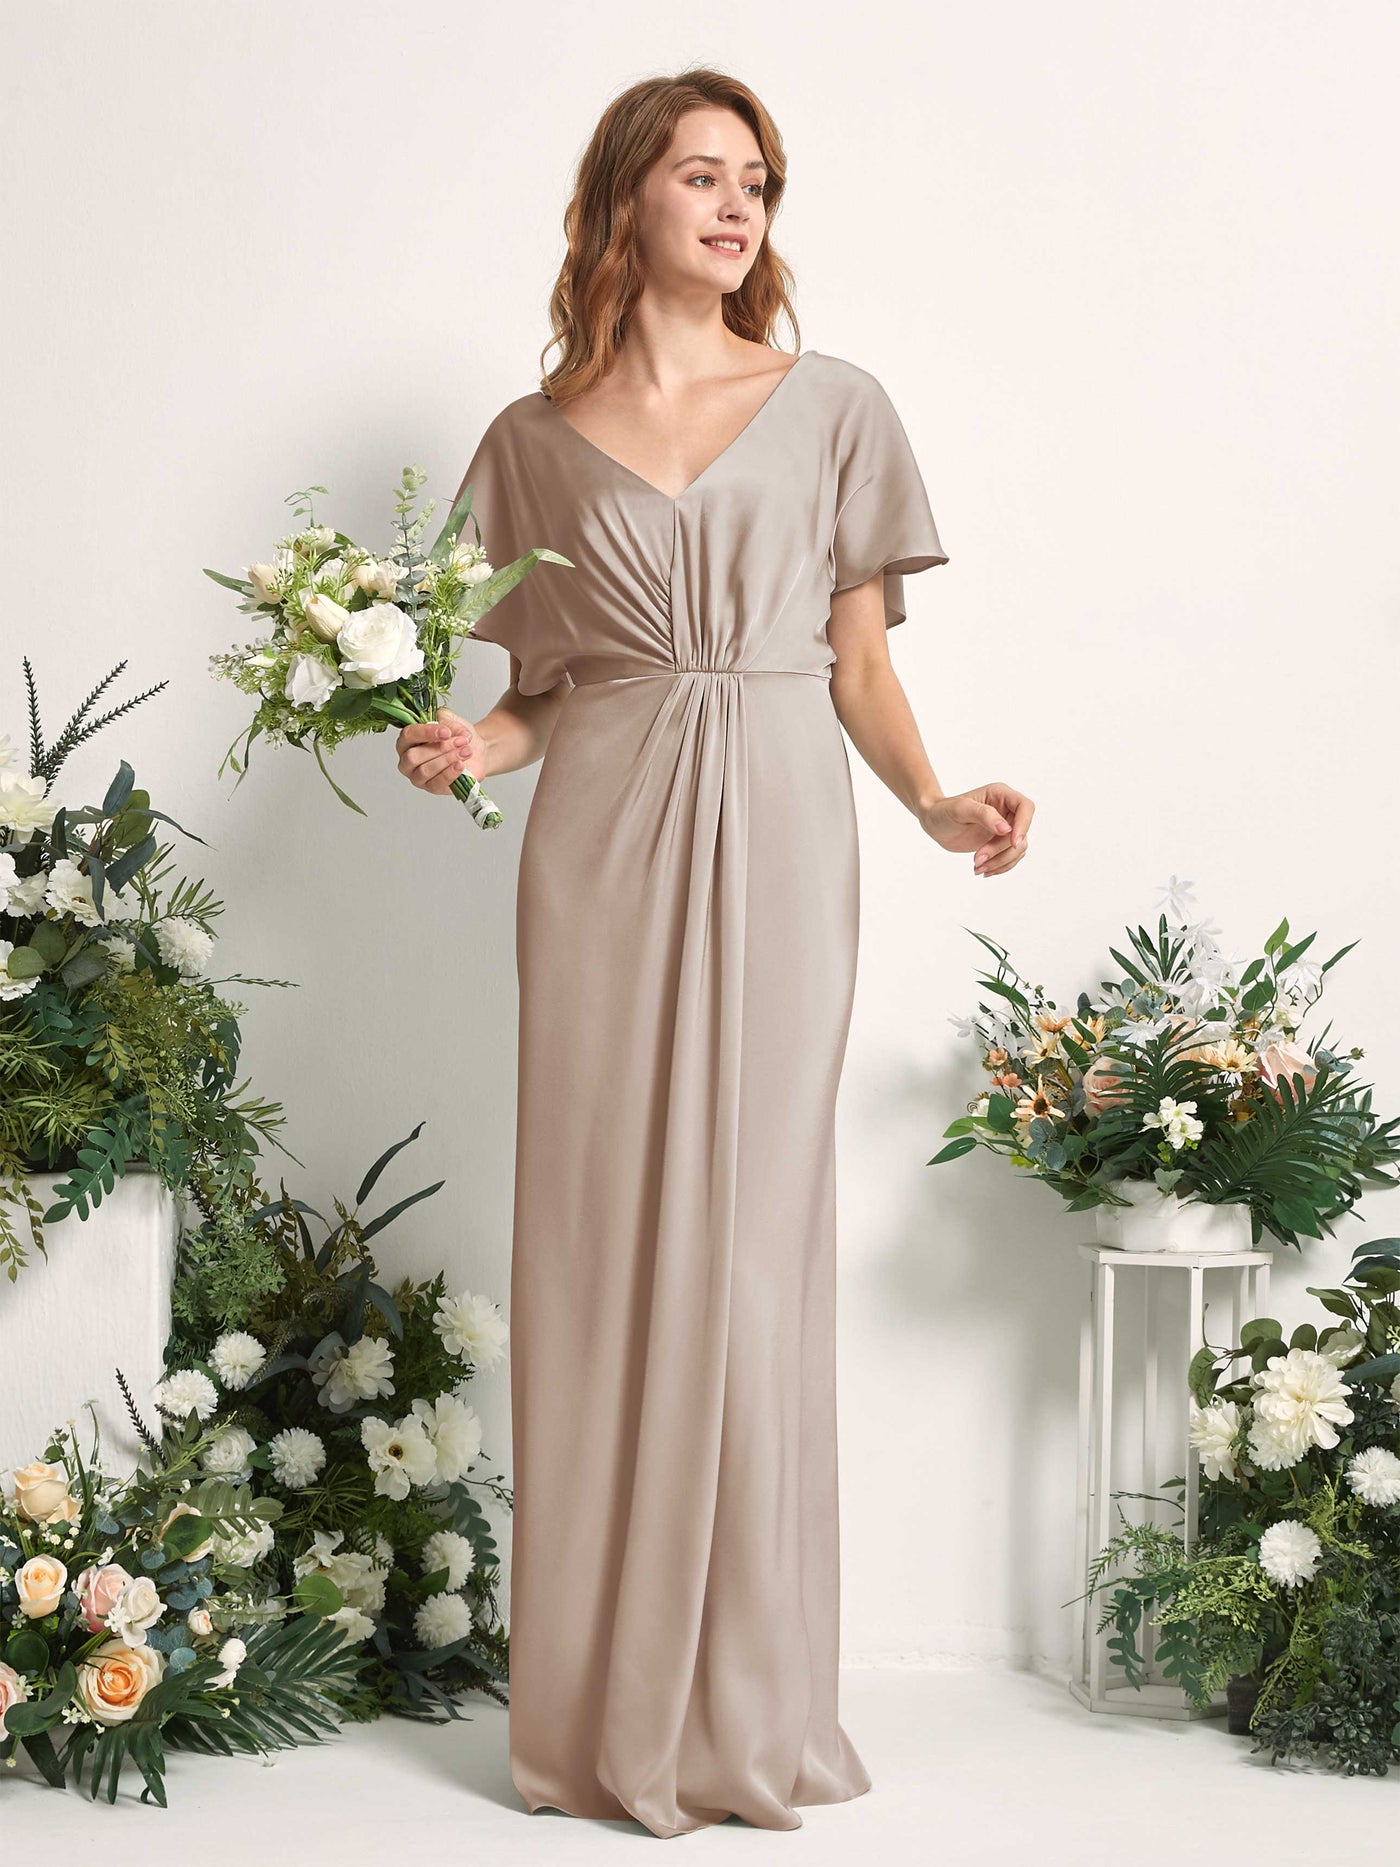 Taupe Bridesmaid Dresses Bridesmaid Dress A-line Satin V-neck Full Length Short Sleeves Wedding Party Dress (80225502)#color_taupe